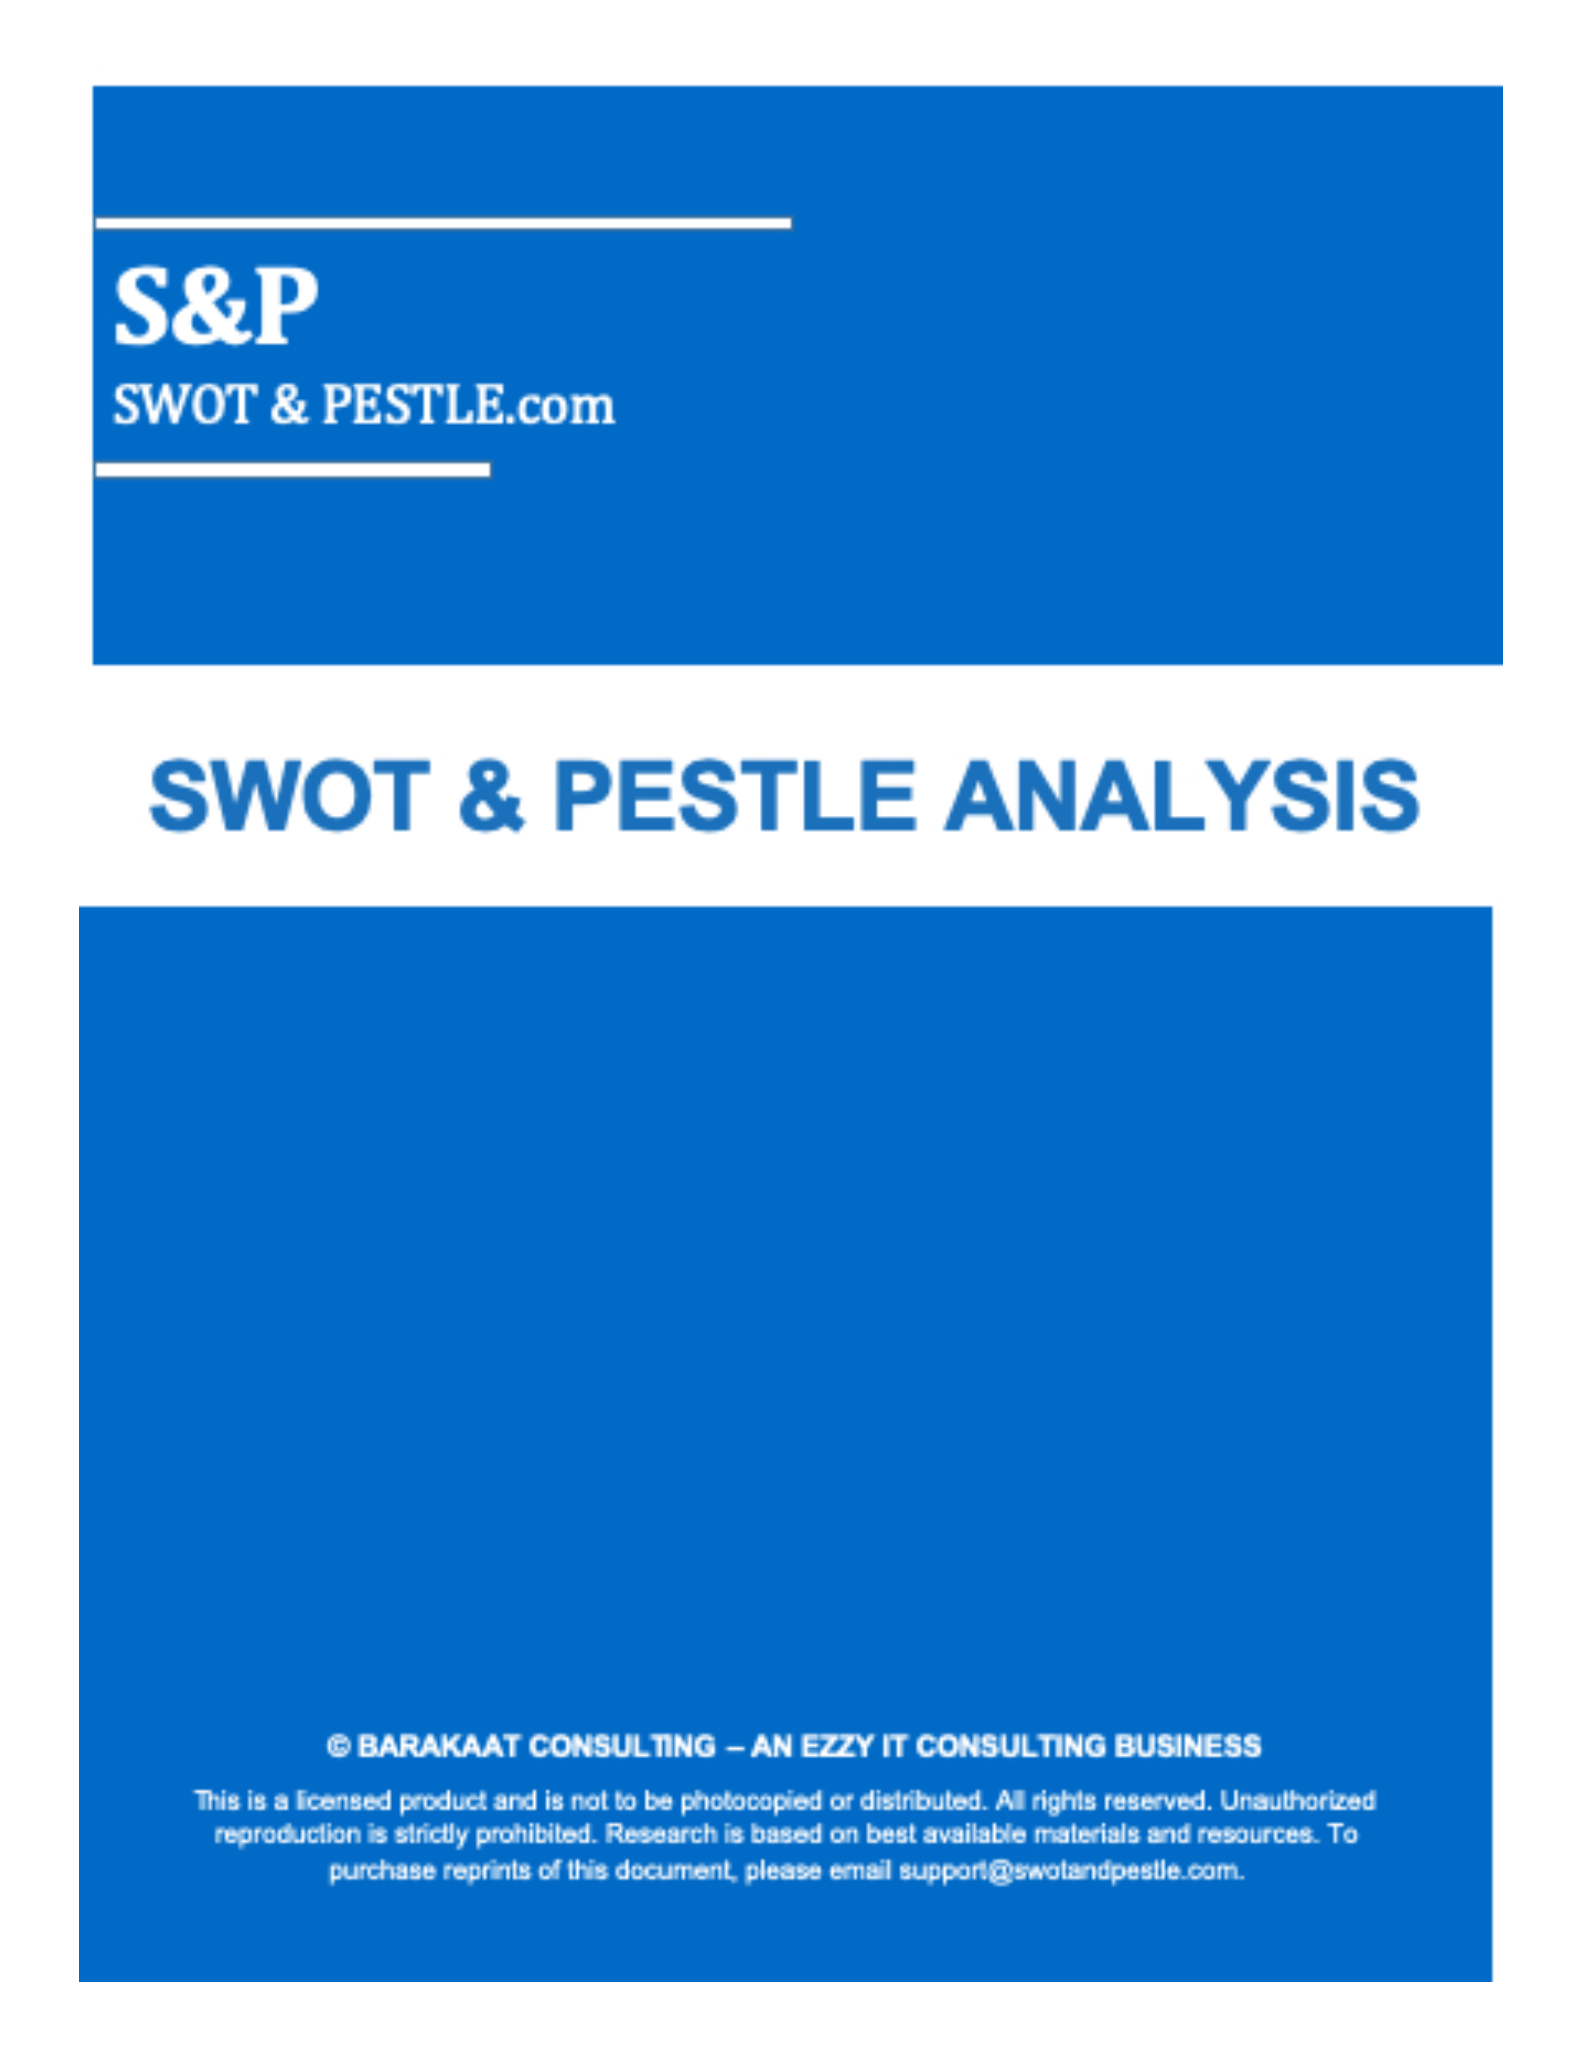 southwest airlines case study swot analysis